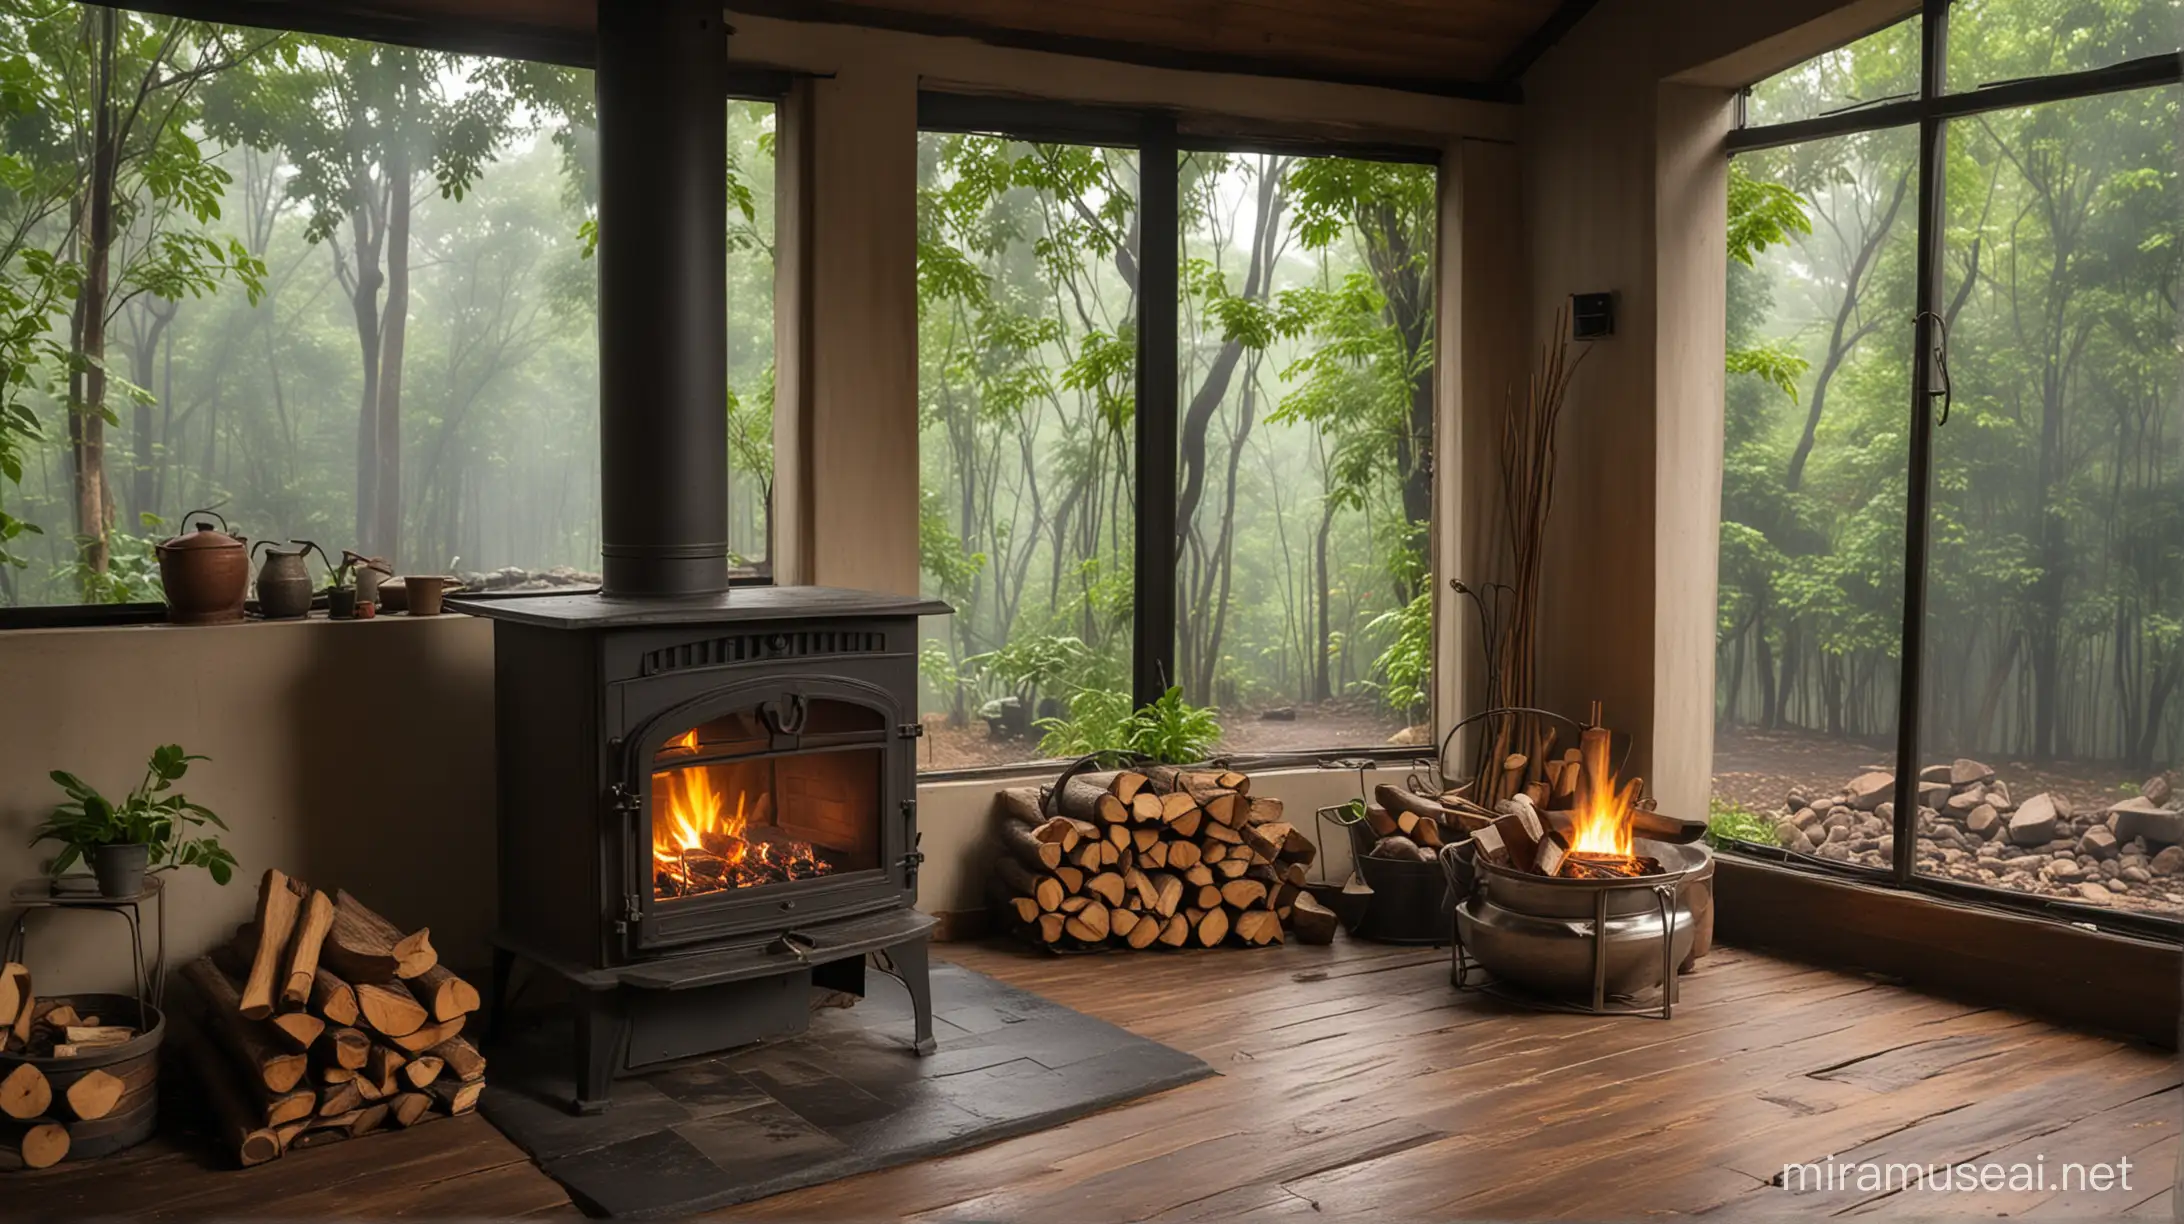 Cozy Cabin with Wooden Stove in Forest Ambiance